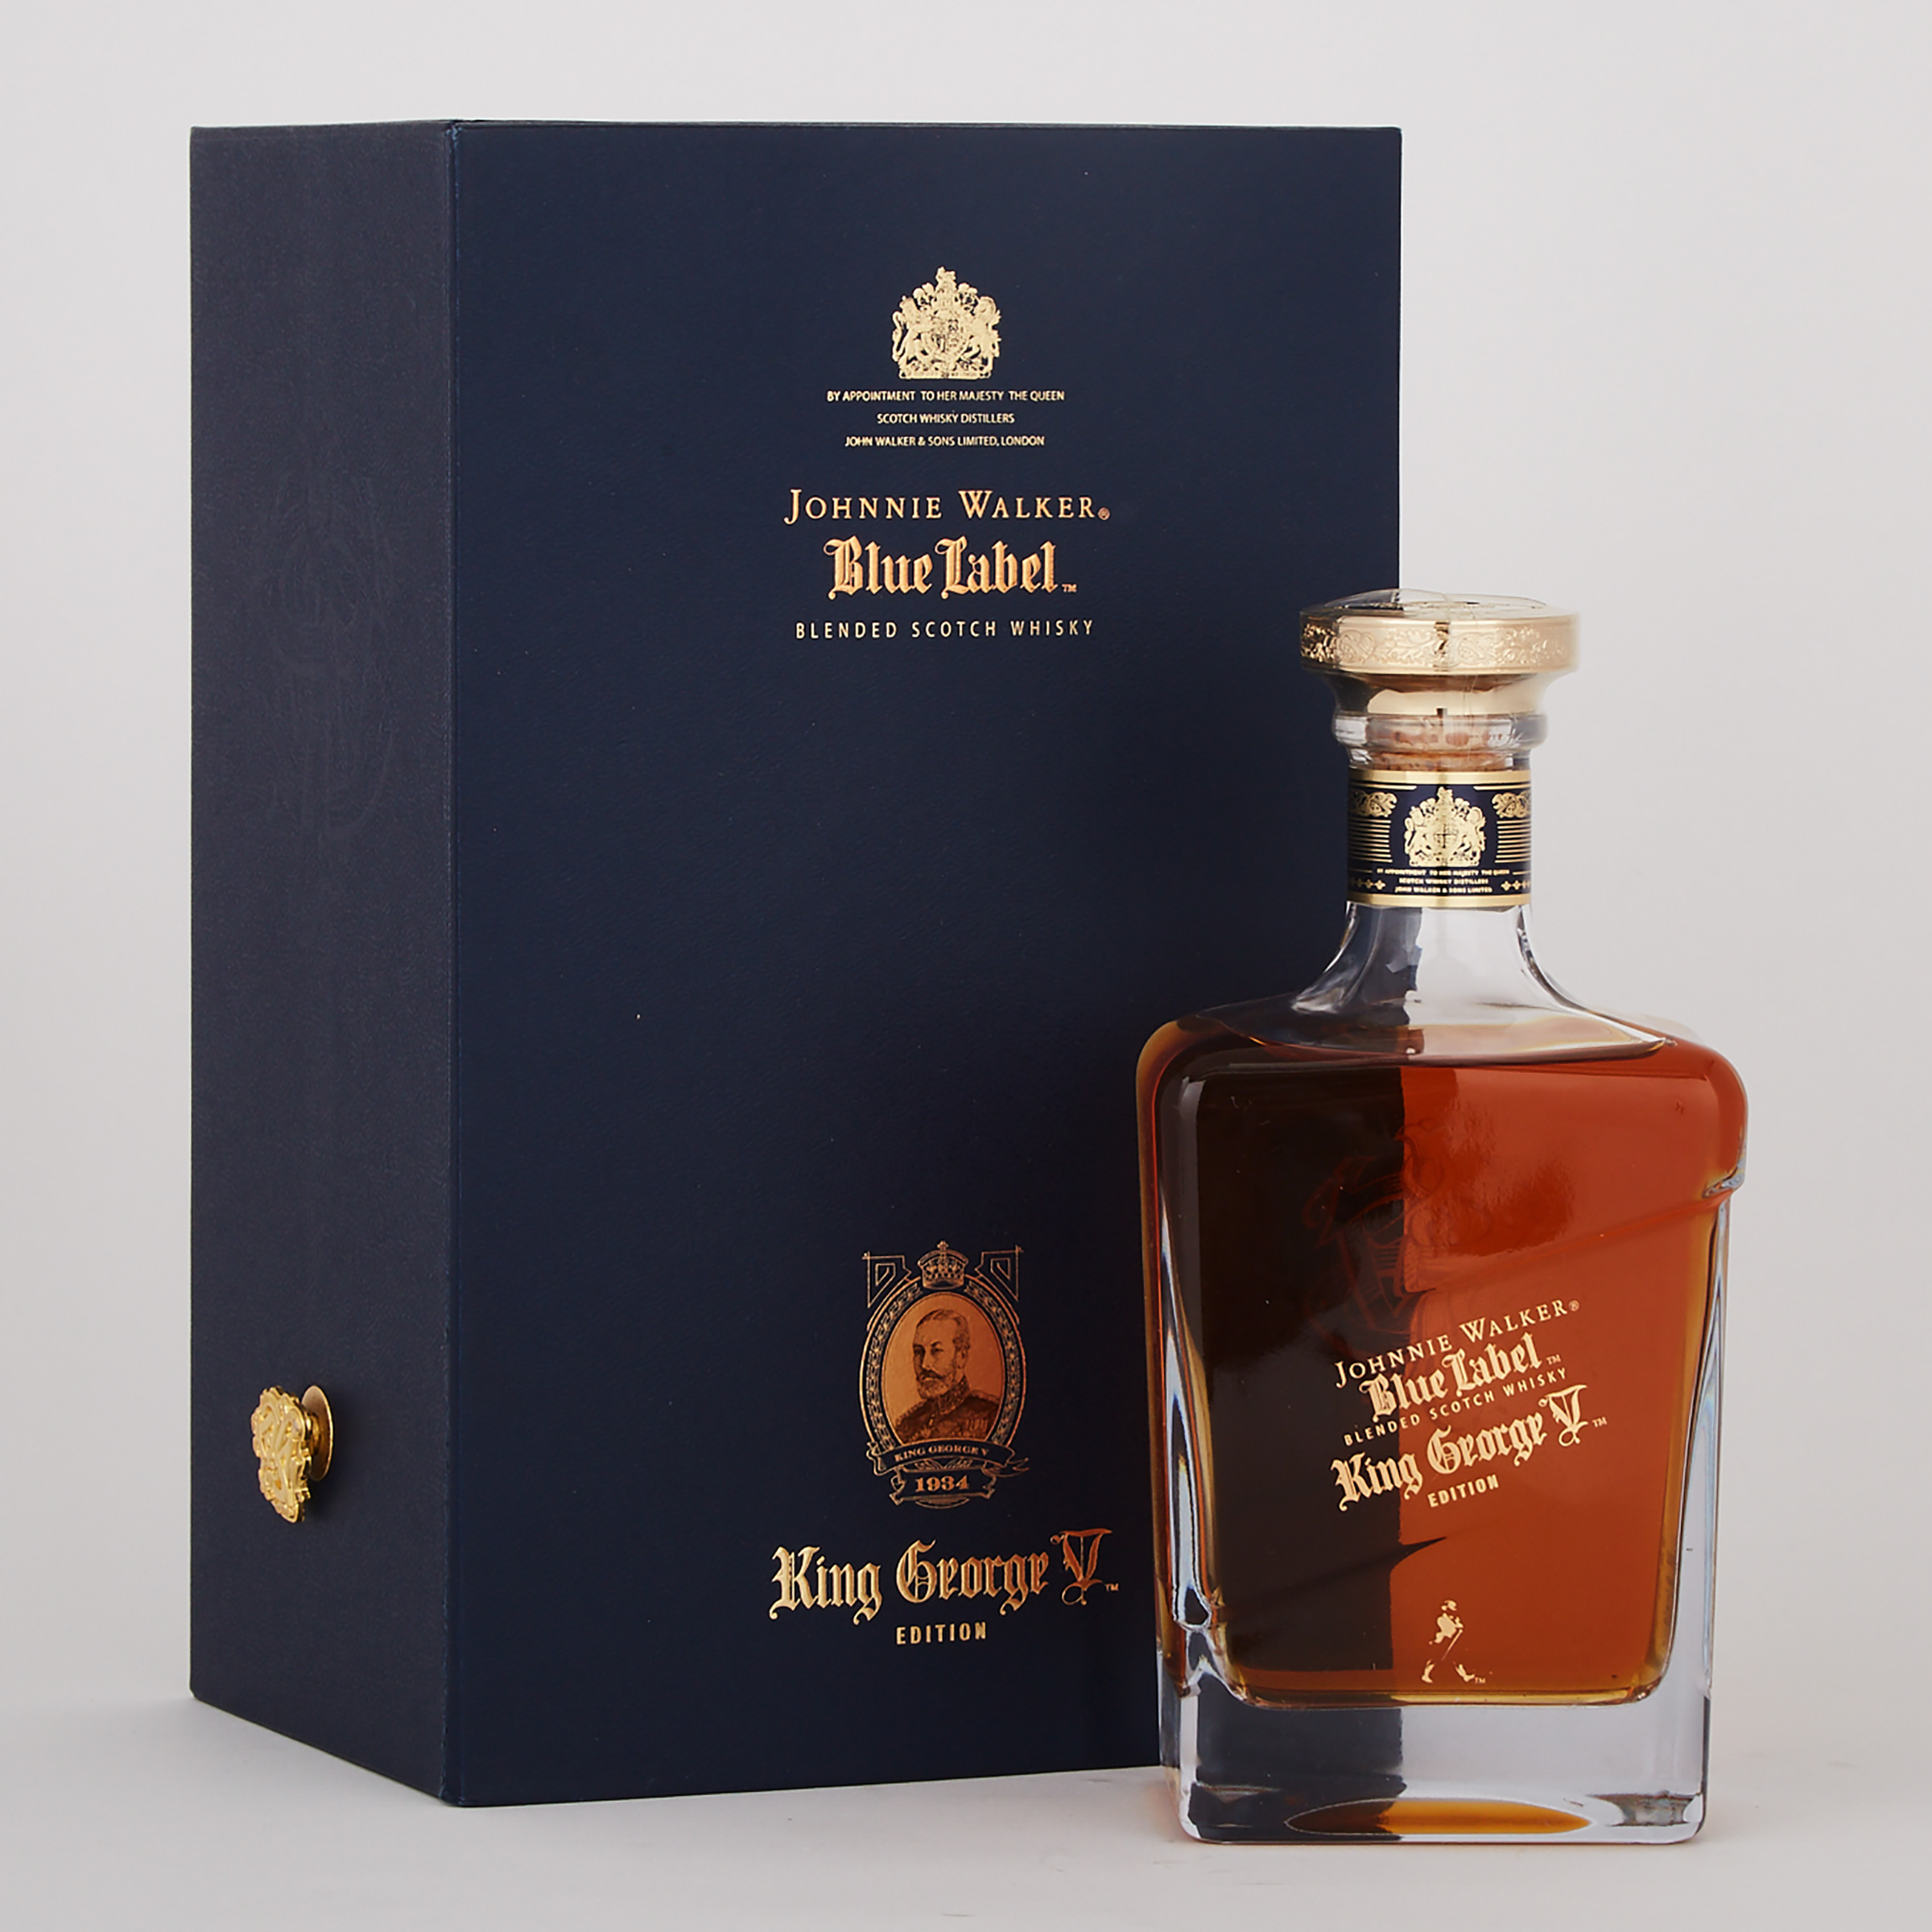 JOHNNIE WALKER BLUE LABEL KING GEORGE THE V EDITION BLENDED SCOTCH WHISKY (ONE 750 ML)